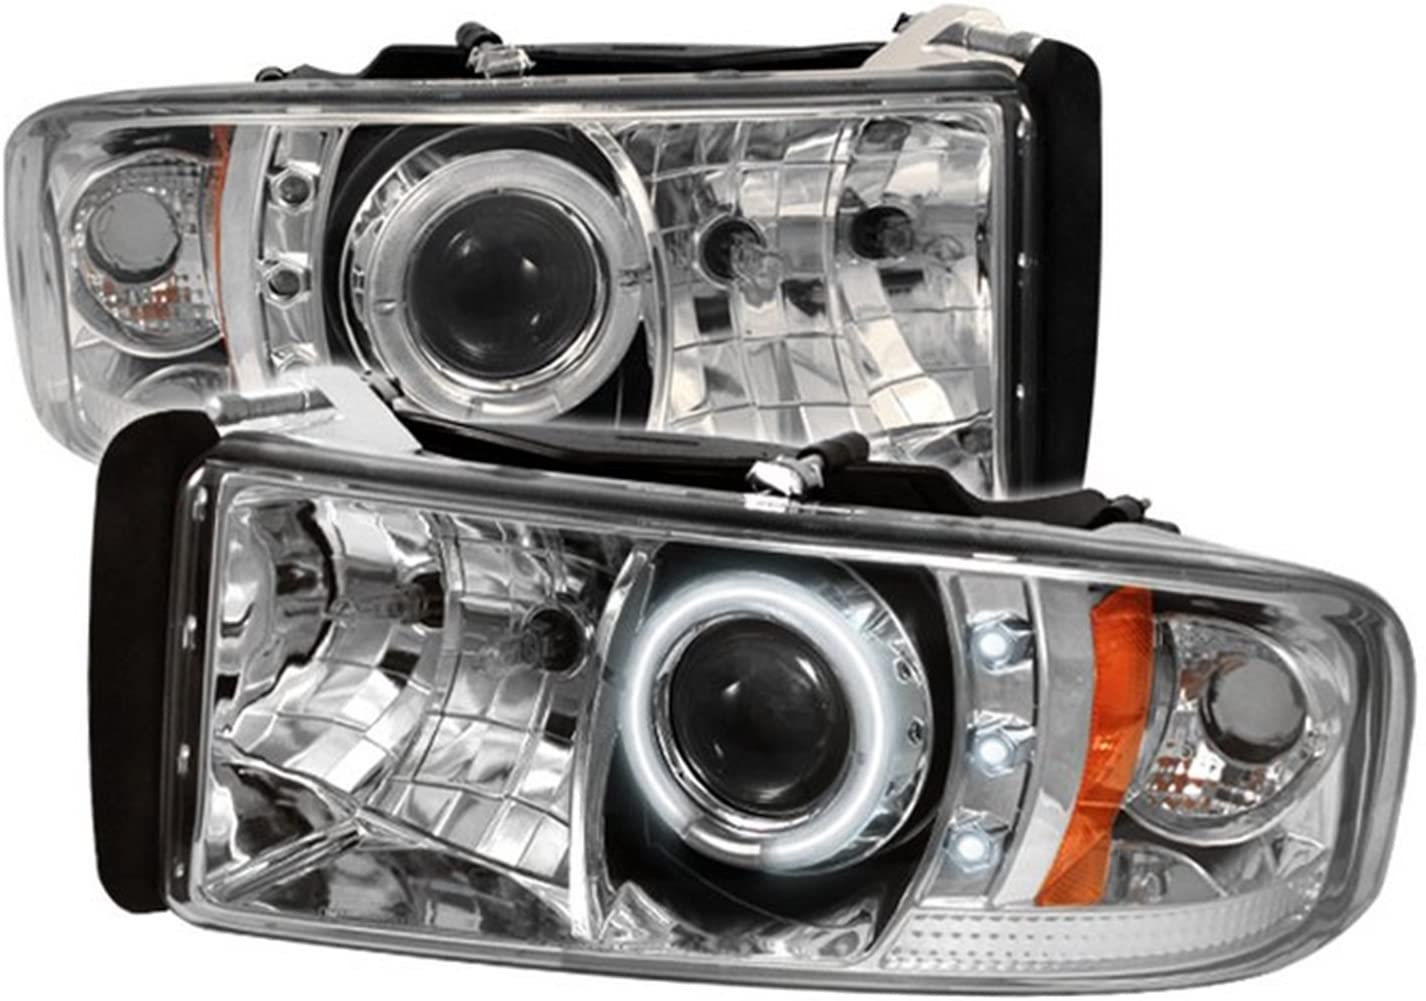 Spyder 5010063 Dodge Ram 1500 94-01 / Ram 2500/3500 94-02/99-01 Ram Sport - Projector Headlights - CCFL Halo - LED (Replaceable LEDs) - Black - High 9005 (Included) - Low H1 (Included)